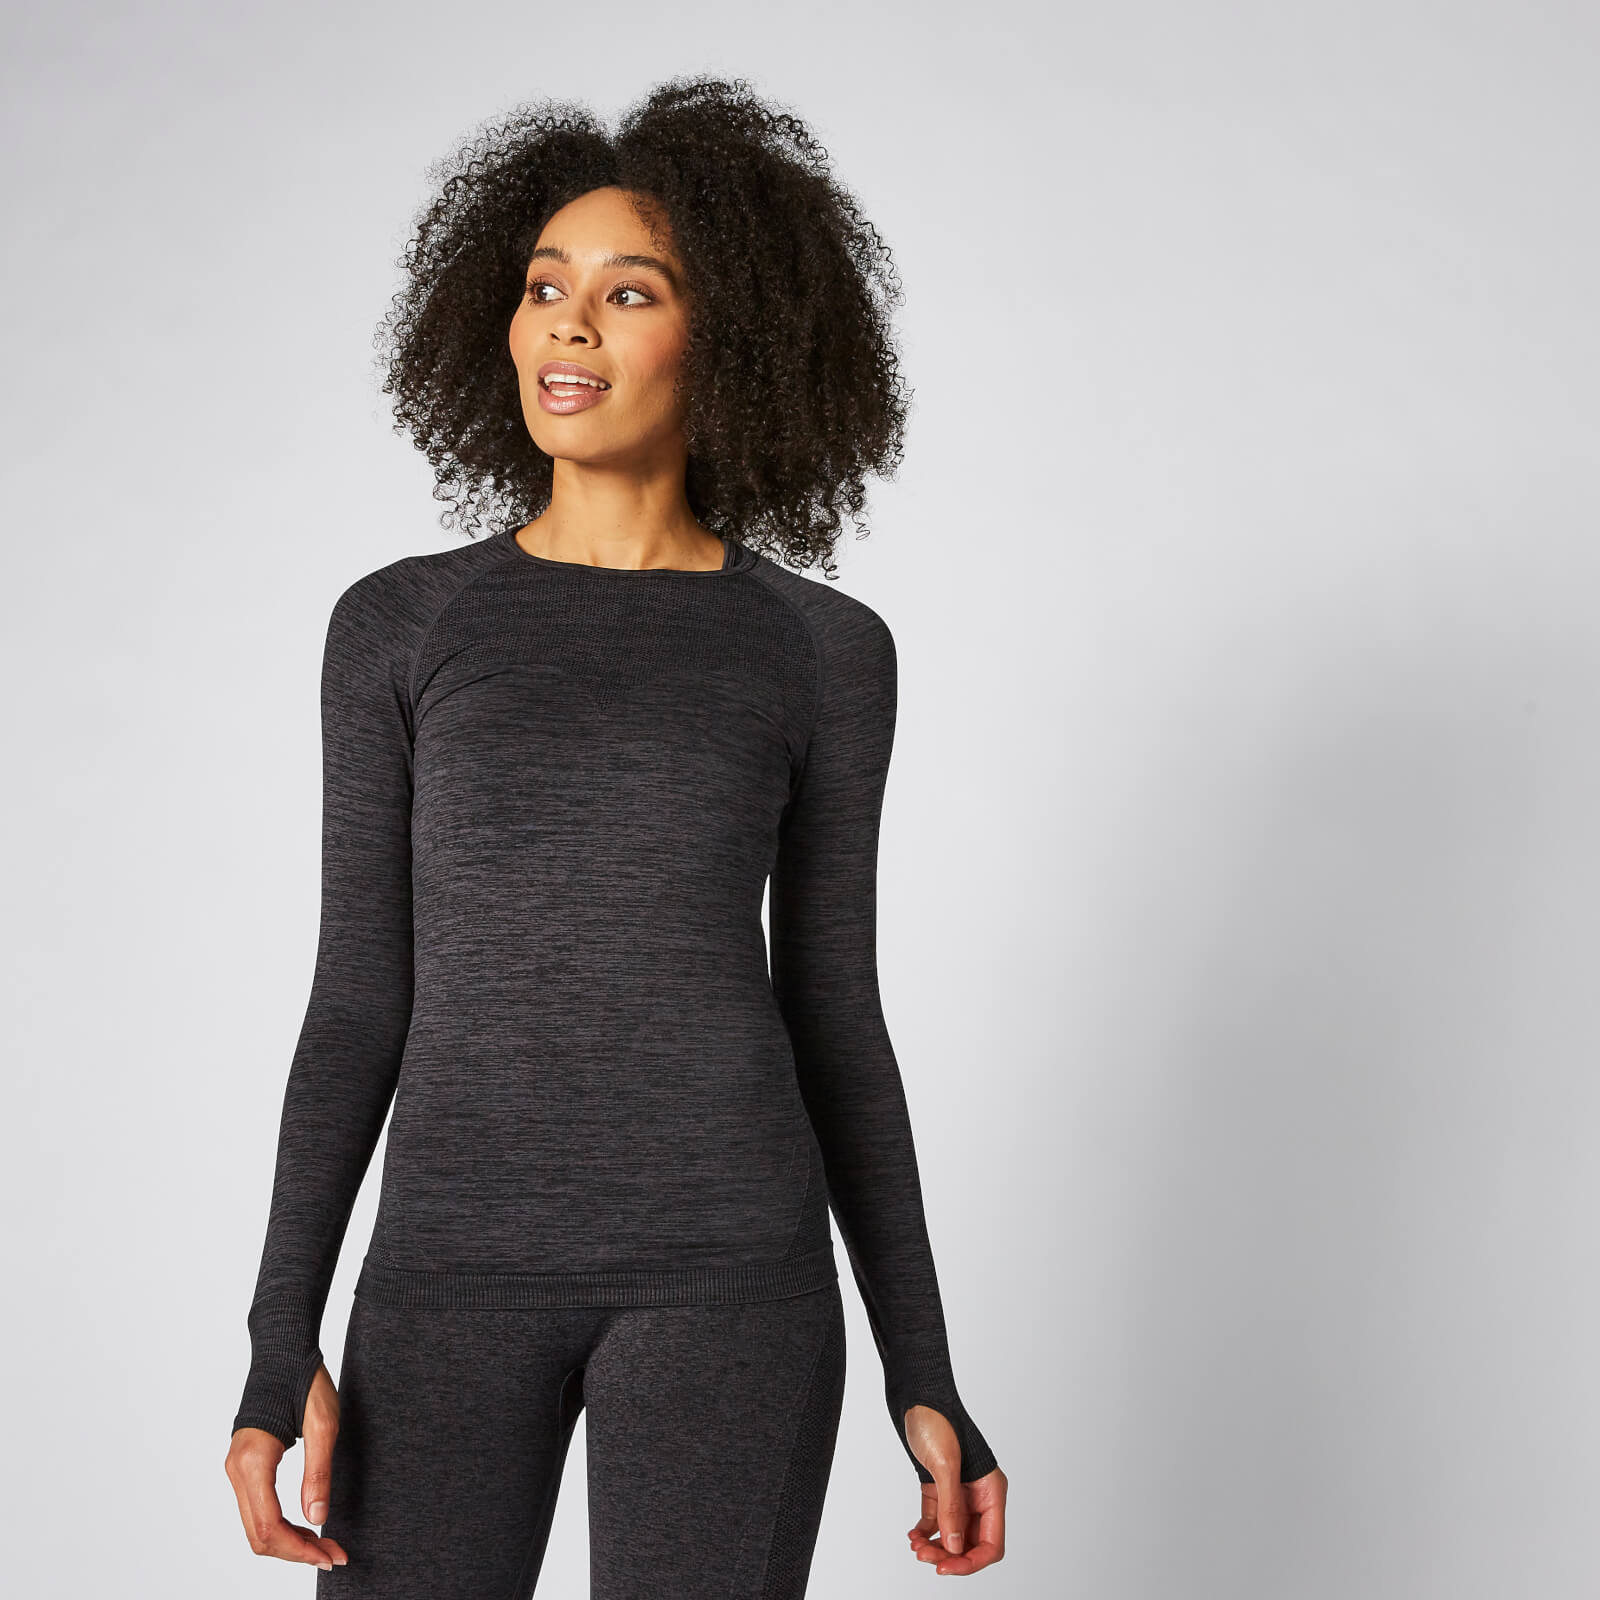 Myprotein Inspire Seamless Long Sleeve Top - Slate - XS